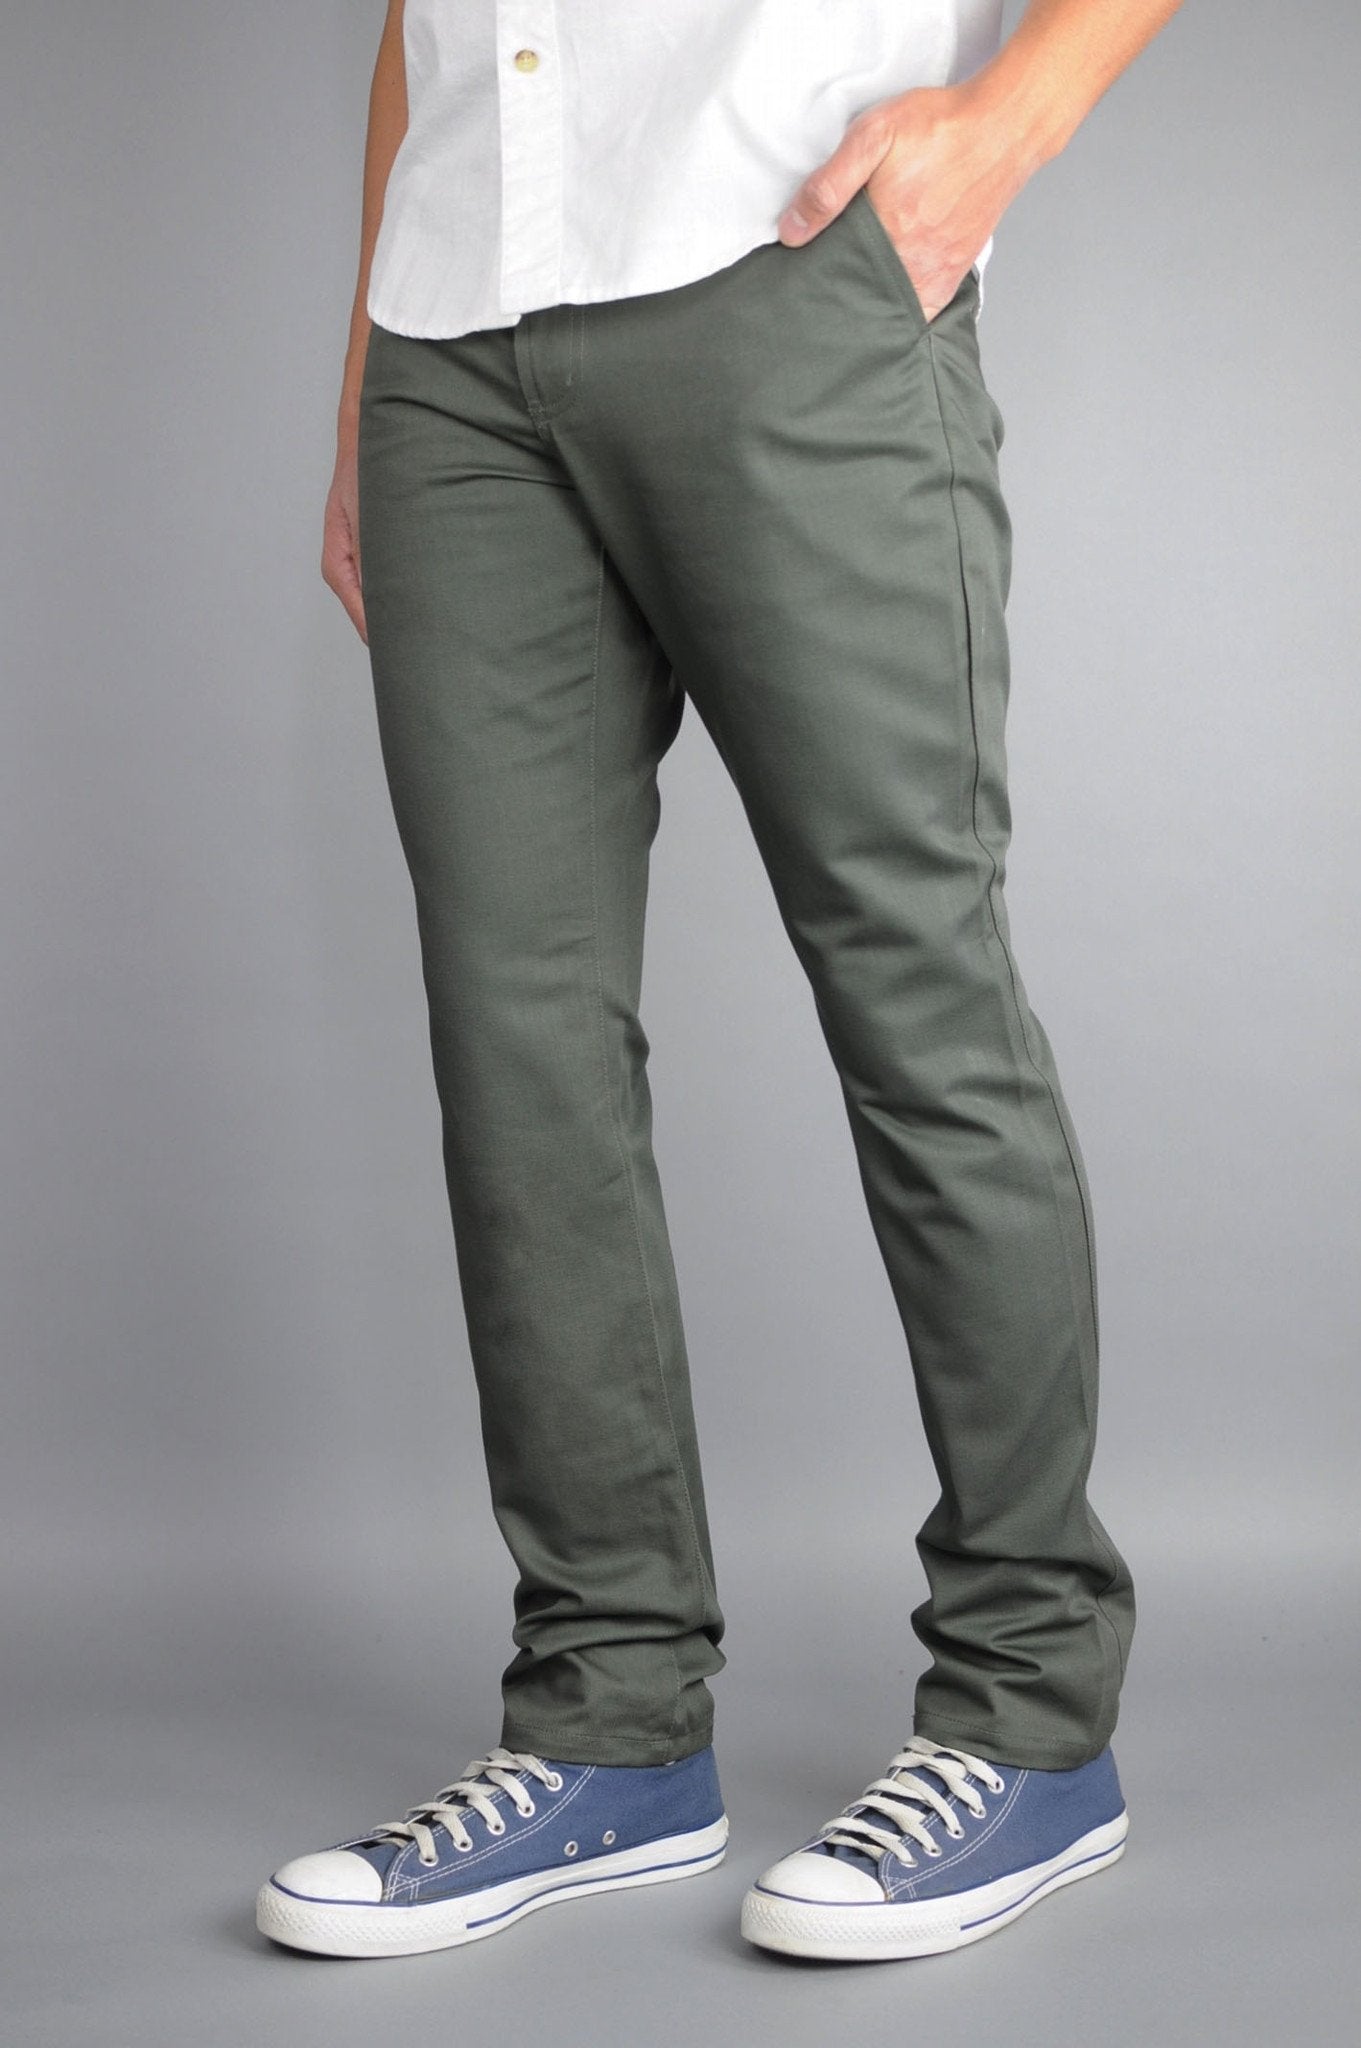 Neo Blue Jeans Army Green Chino Pants